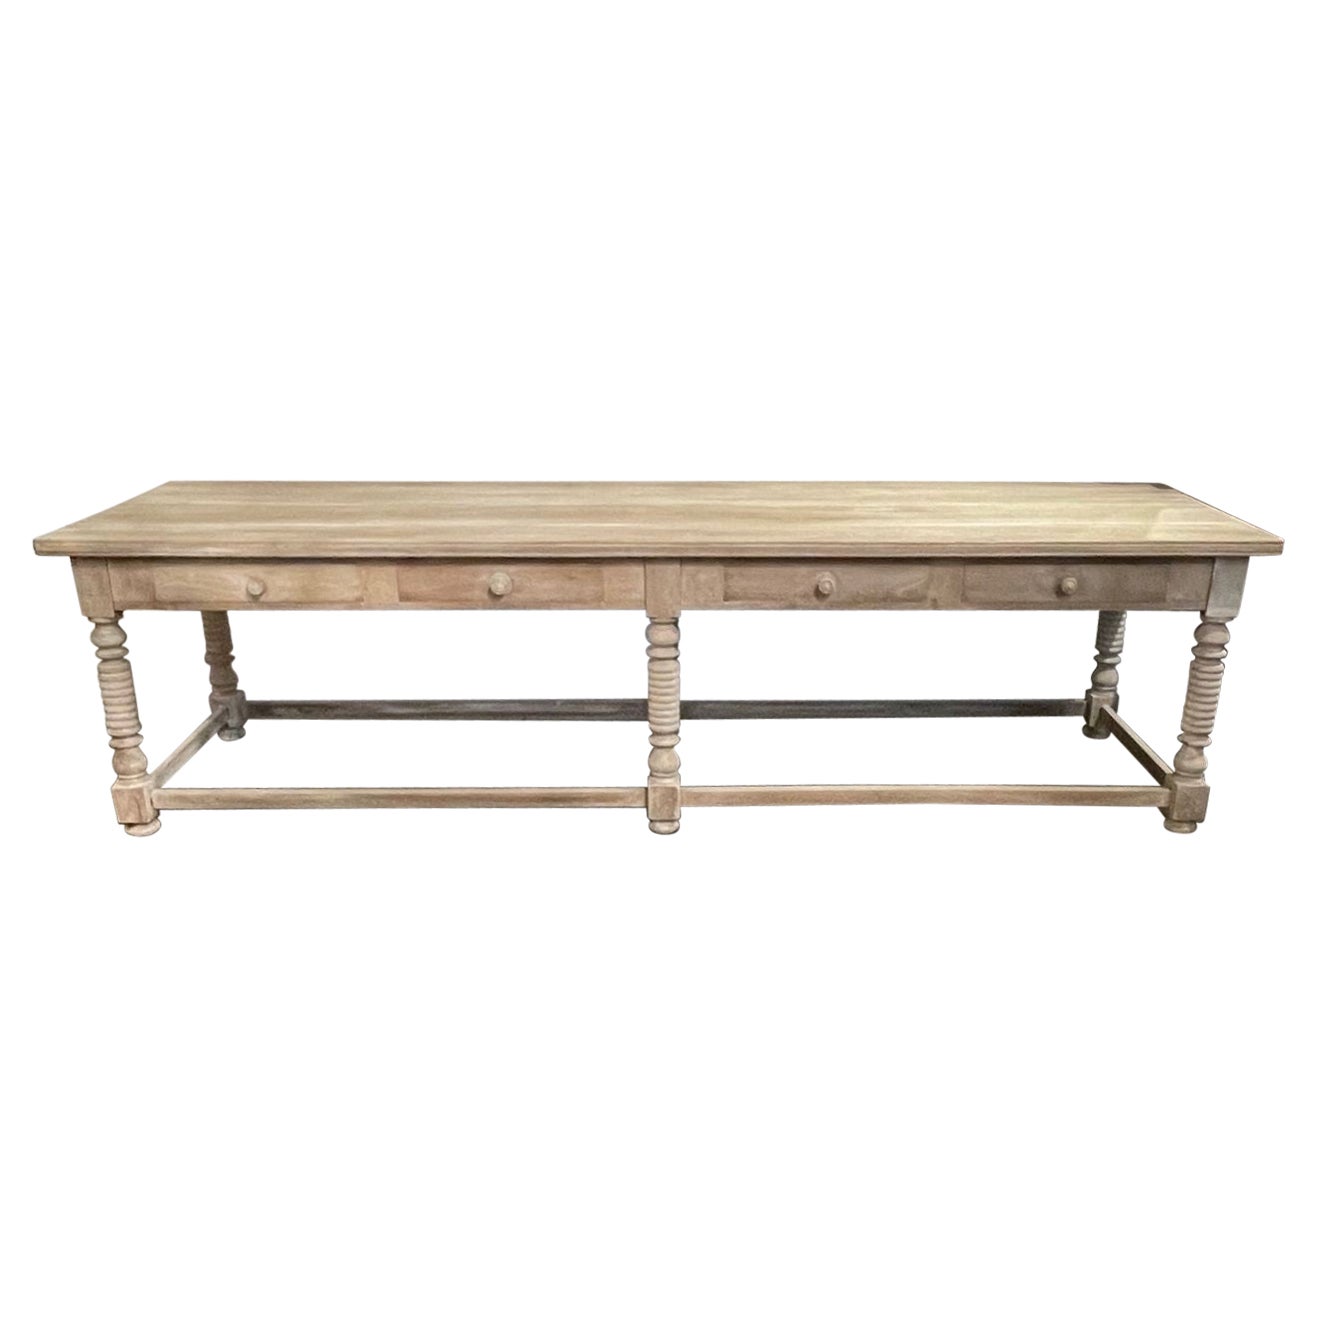 19th Century French Bleached Walnut Drapers Table